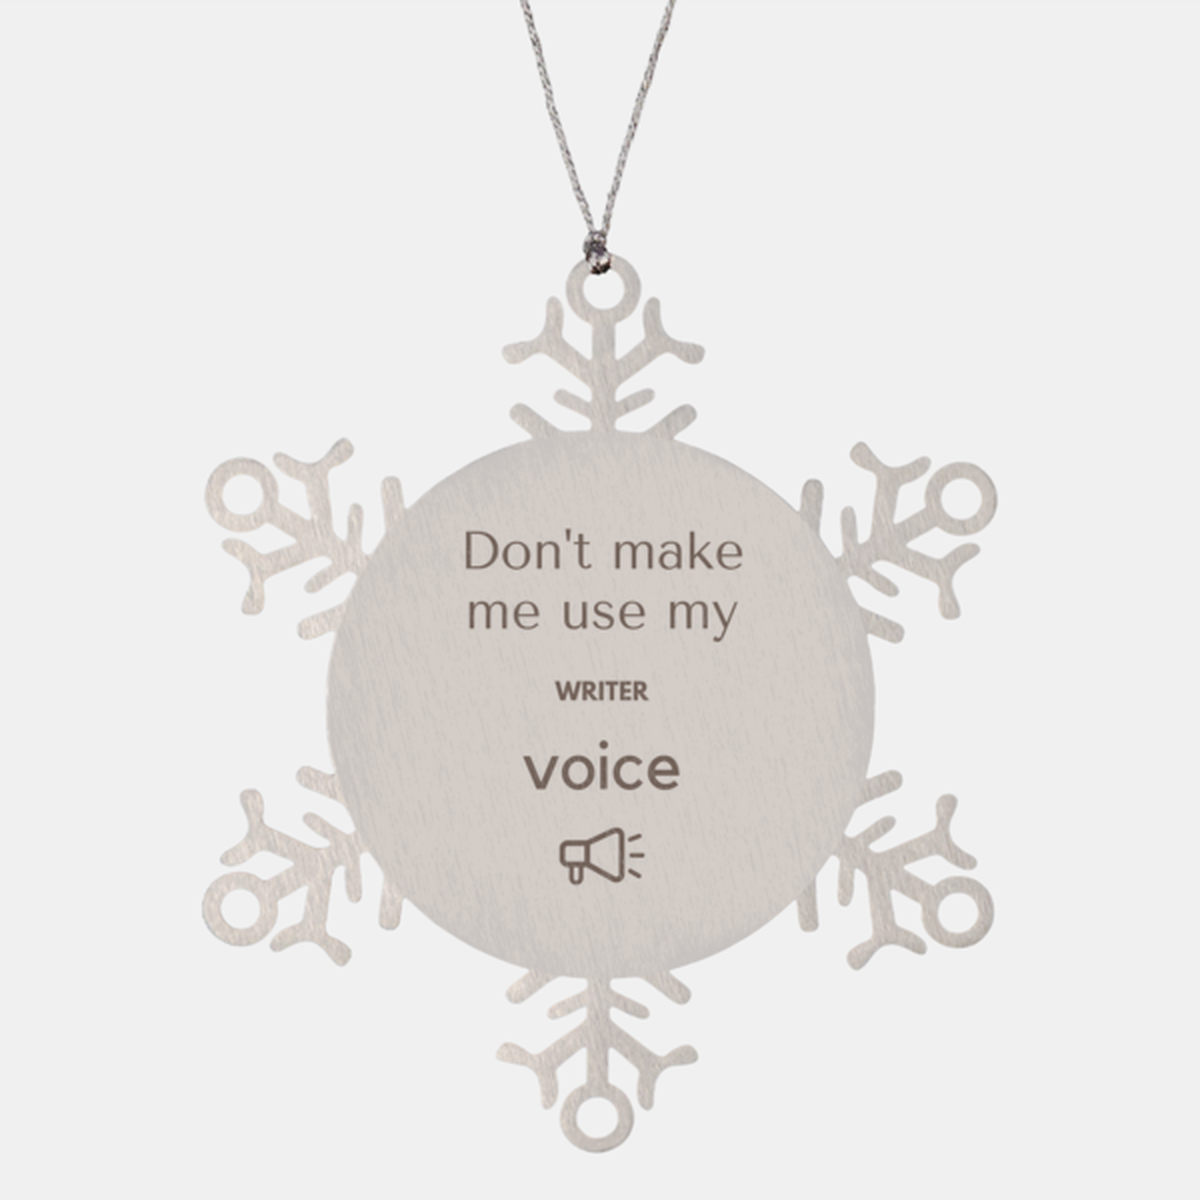 Don't make me use my Writer voice, Sarcasm Writer Ornament Gifts, Christmas Writer Snowflake Ornament Unique Gifts For Writer Coworkers, Men, Women, Colleague, Friends